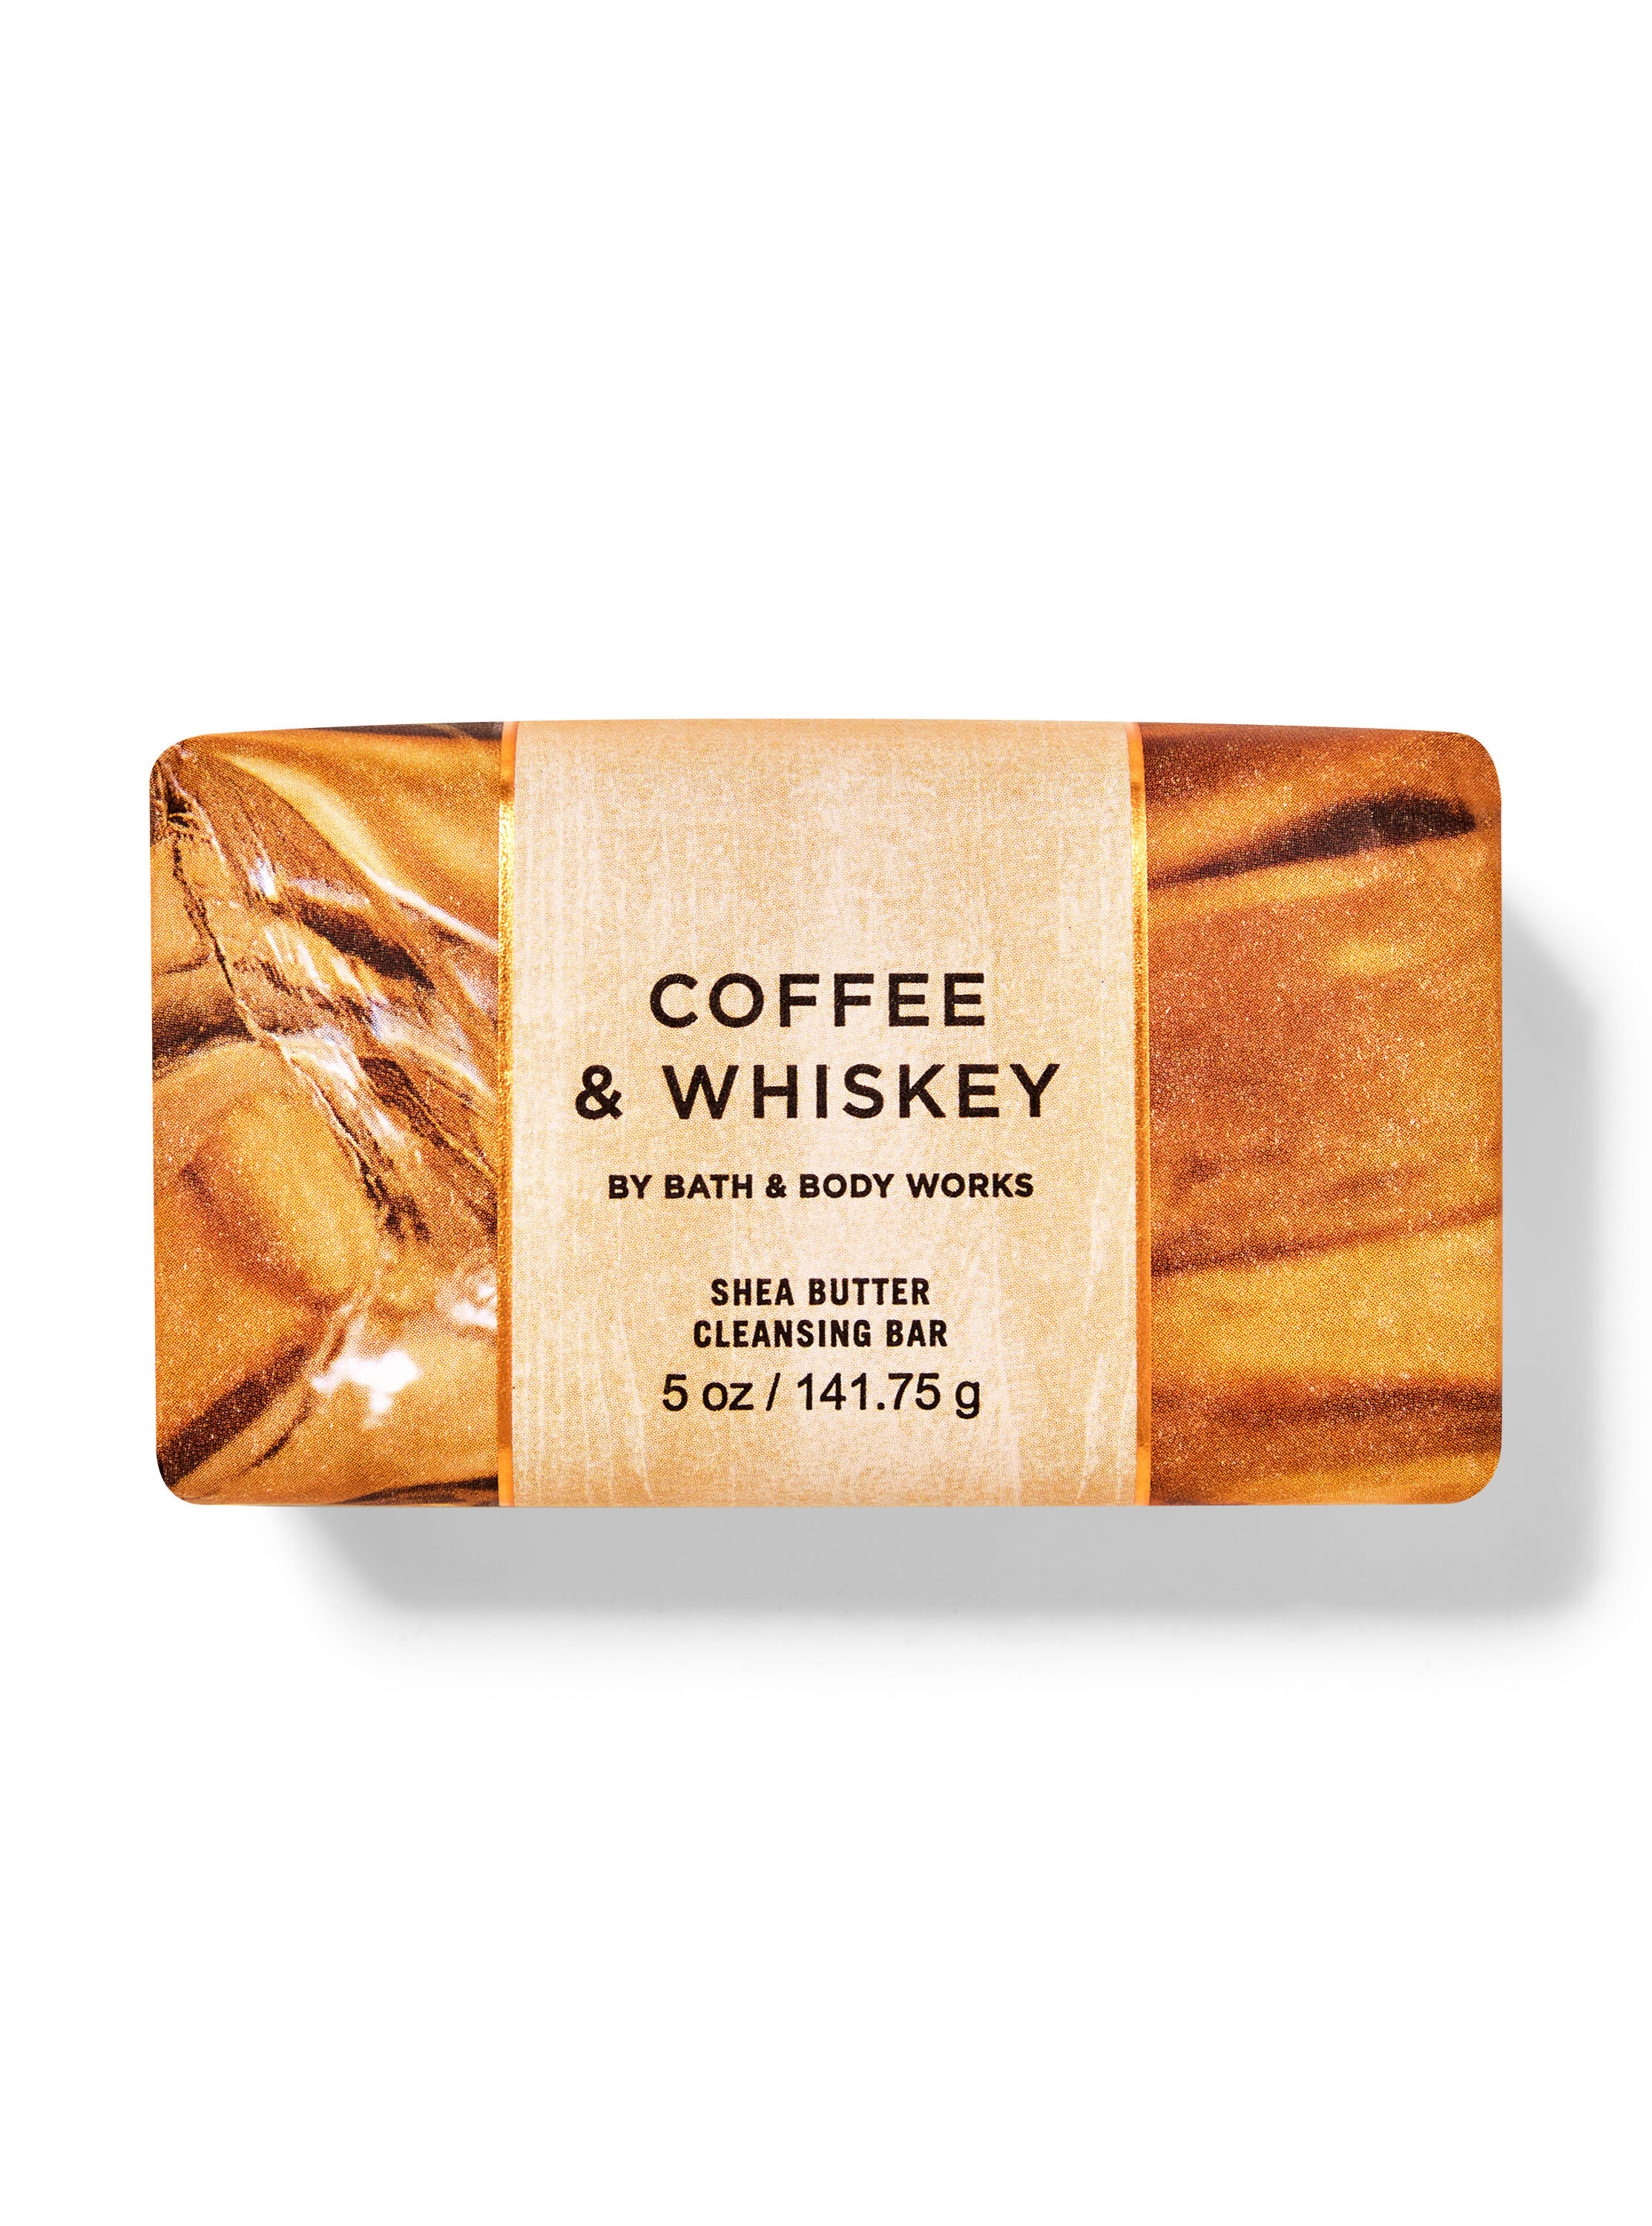 Coffee & Whiskey Shea Butter Cleansing Bar